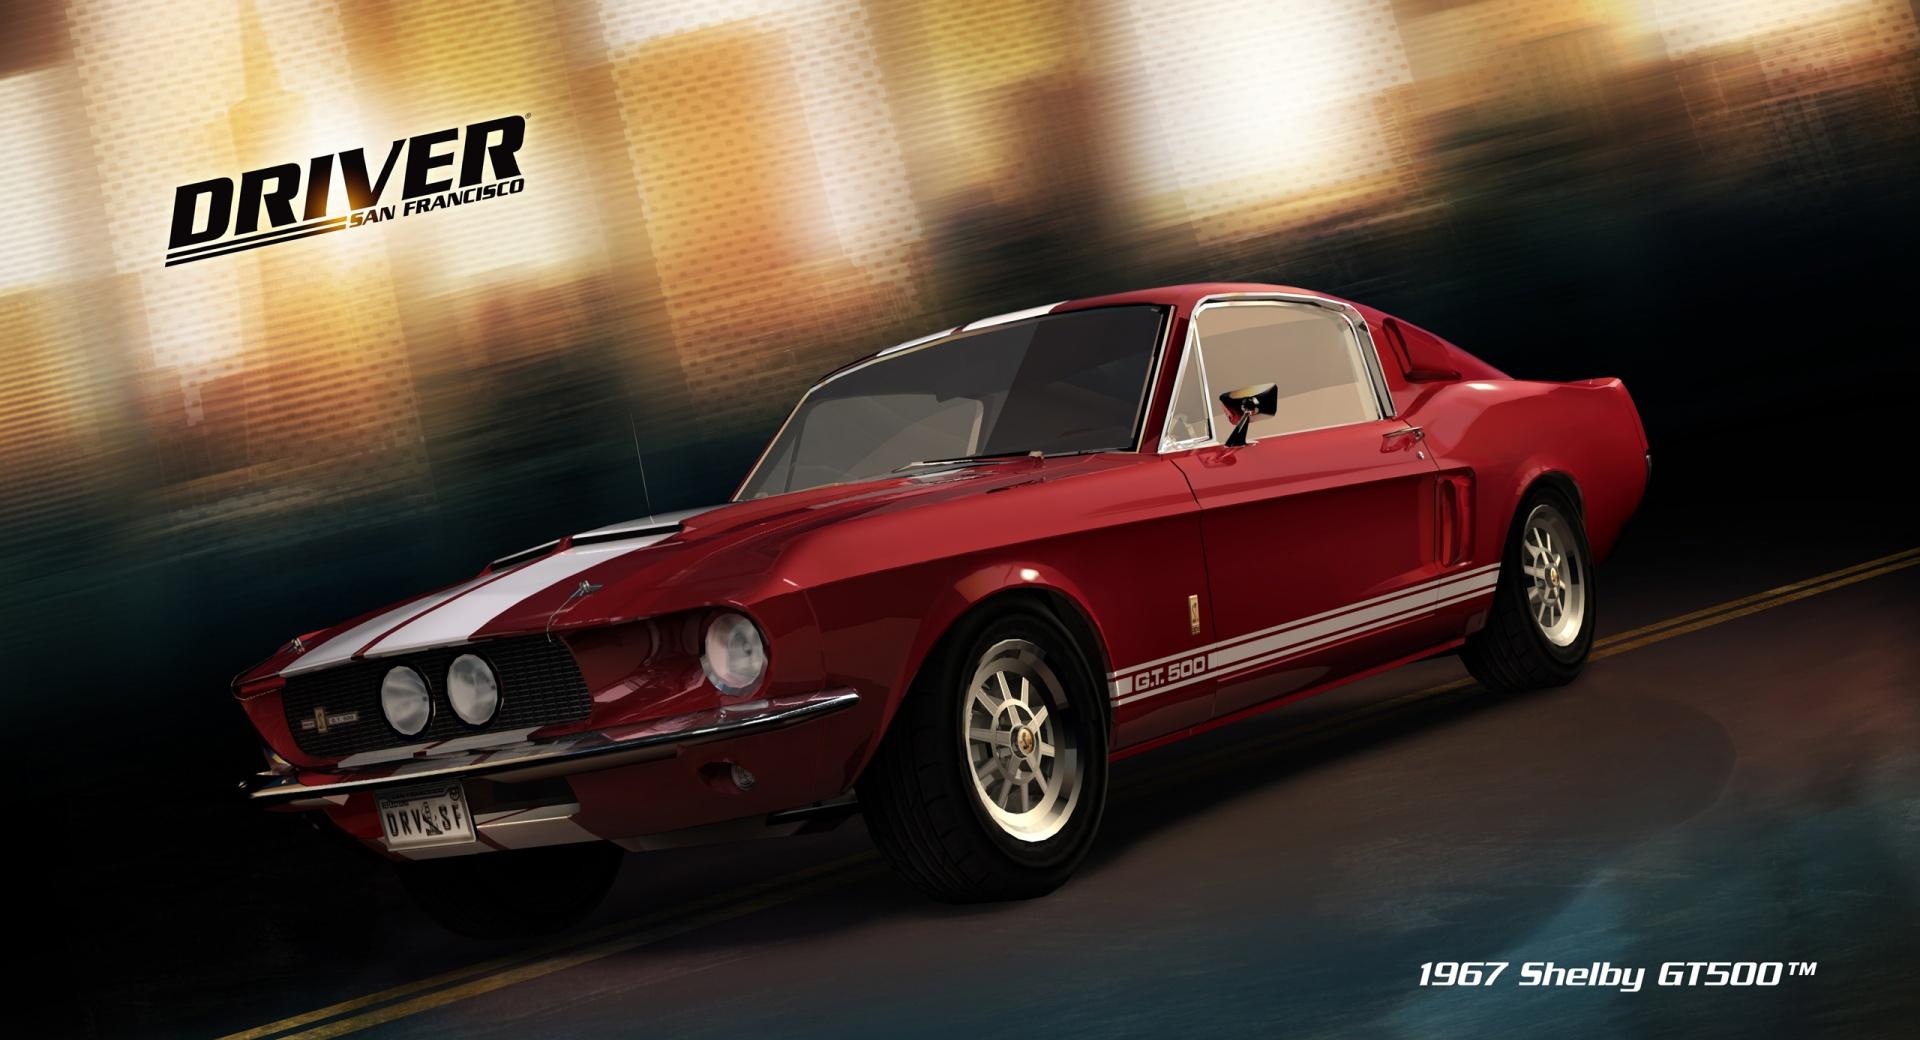 Driver San Francisco 1967 Shelby GT500 wallpapers HD quality